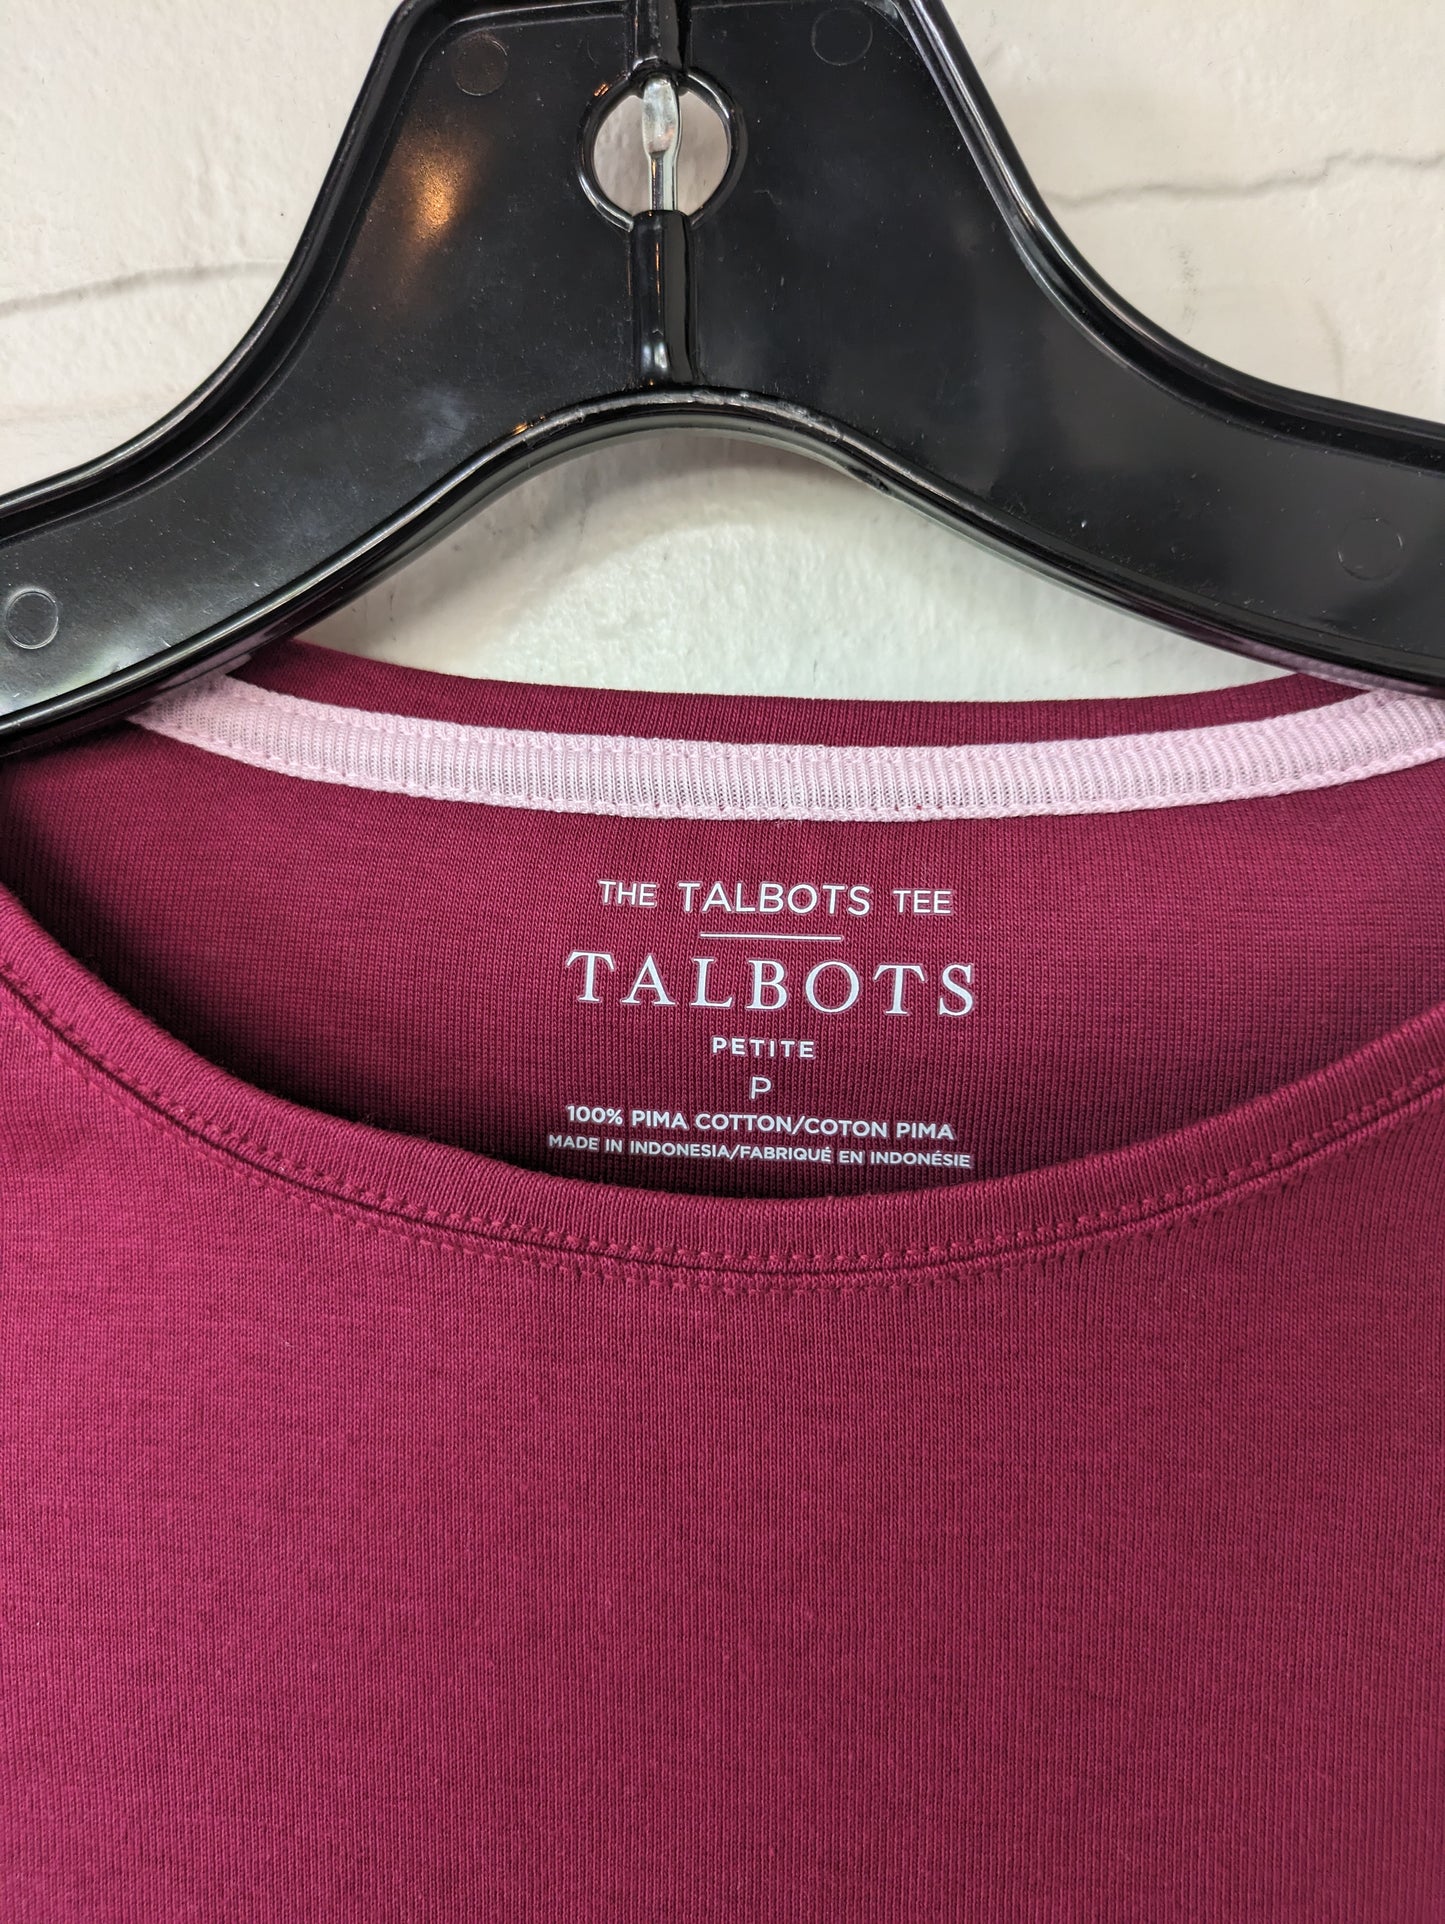 Top Long Sleeve Basic By Talbots  Size: Petite